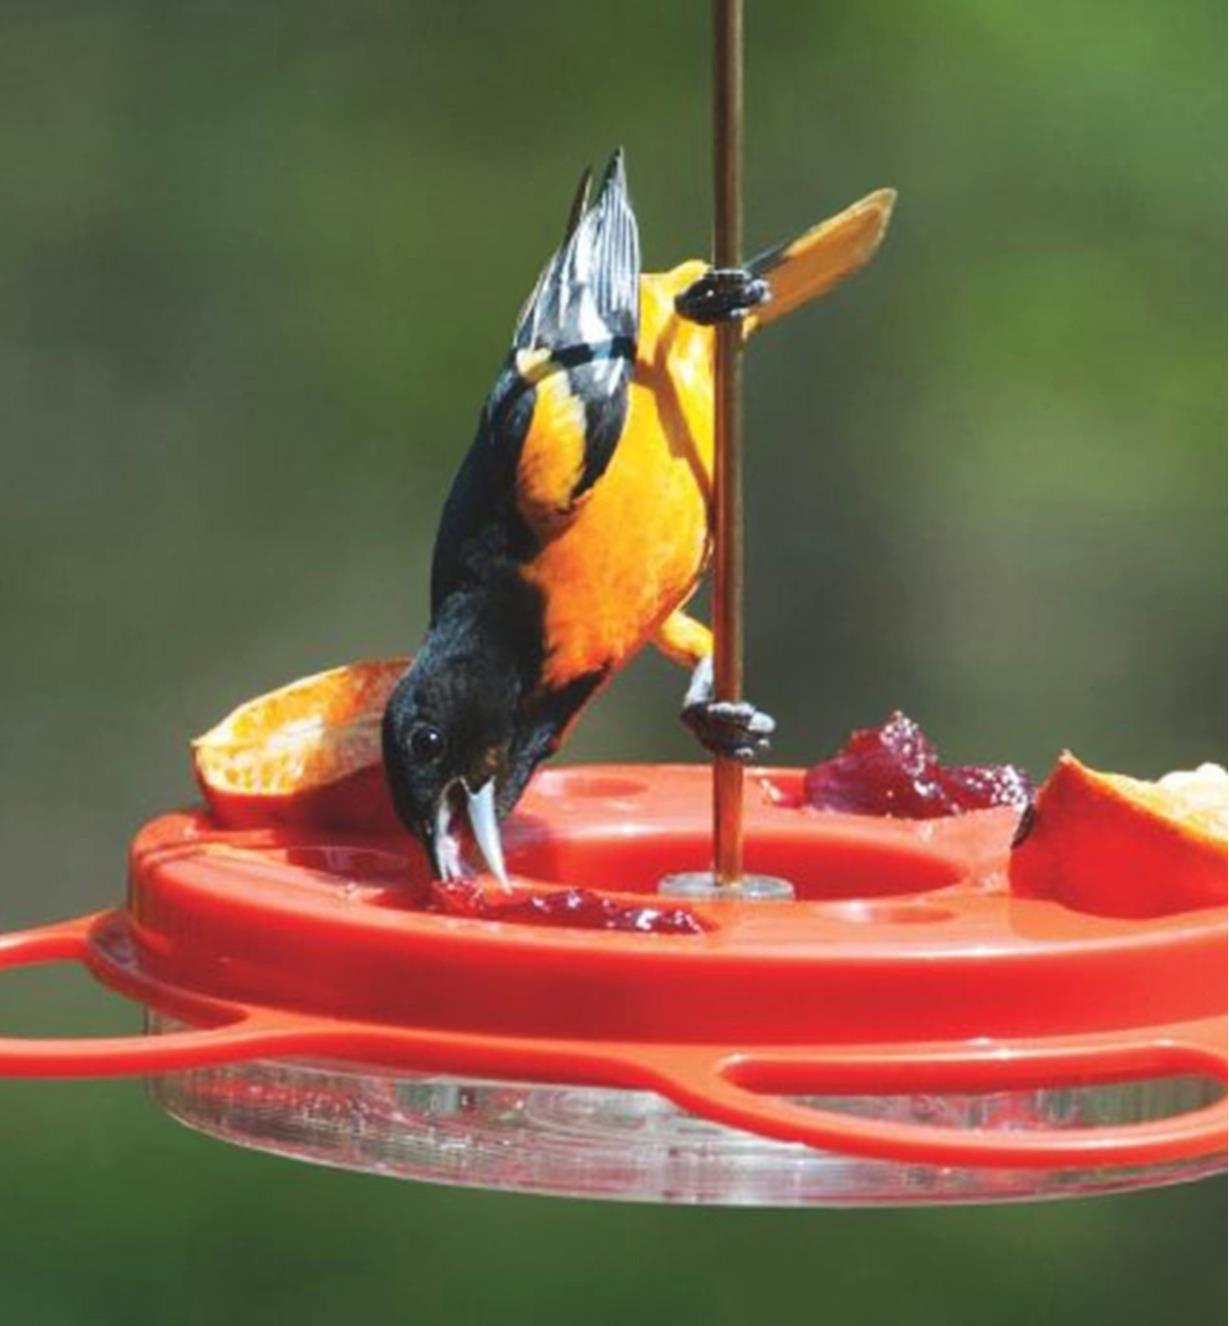 An oriole clings to the hanger of the oriole bird feeder to eat jelly